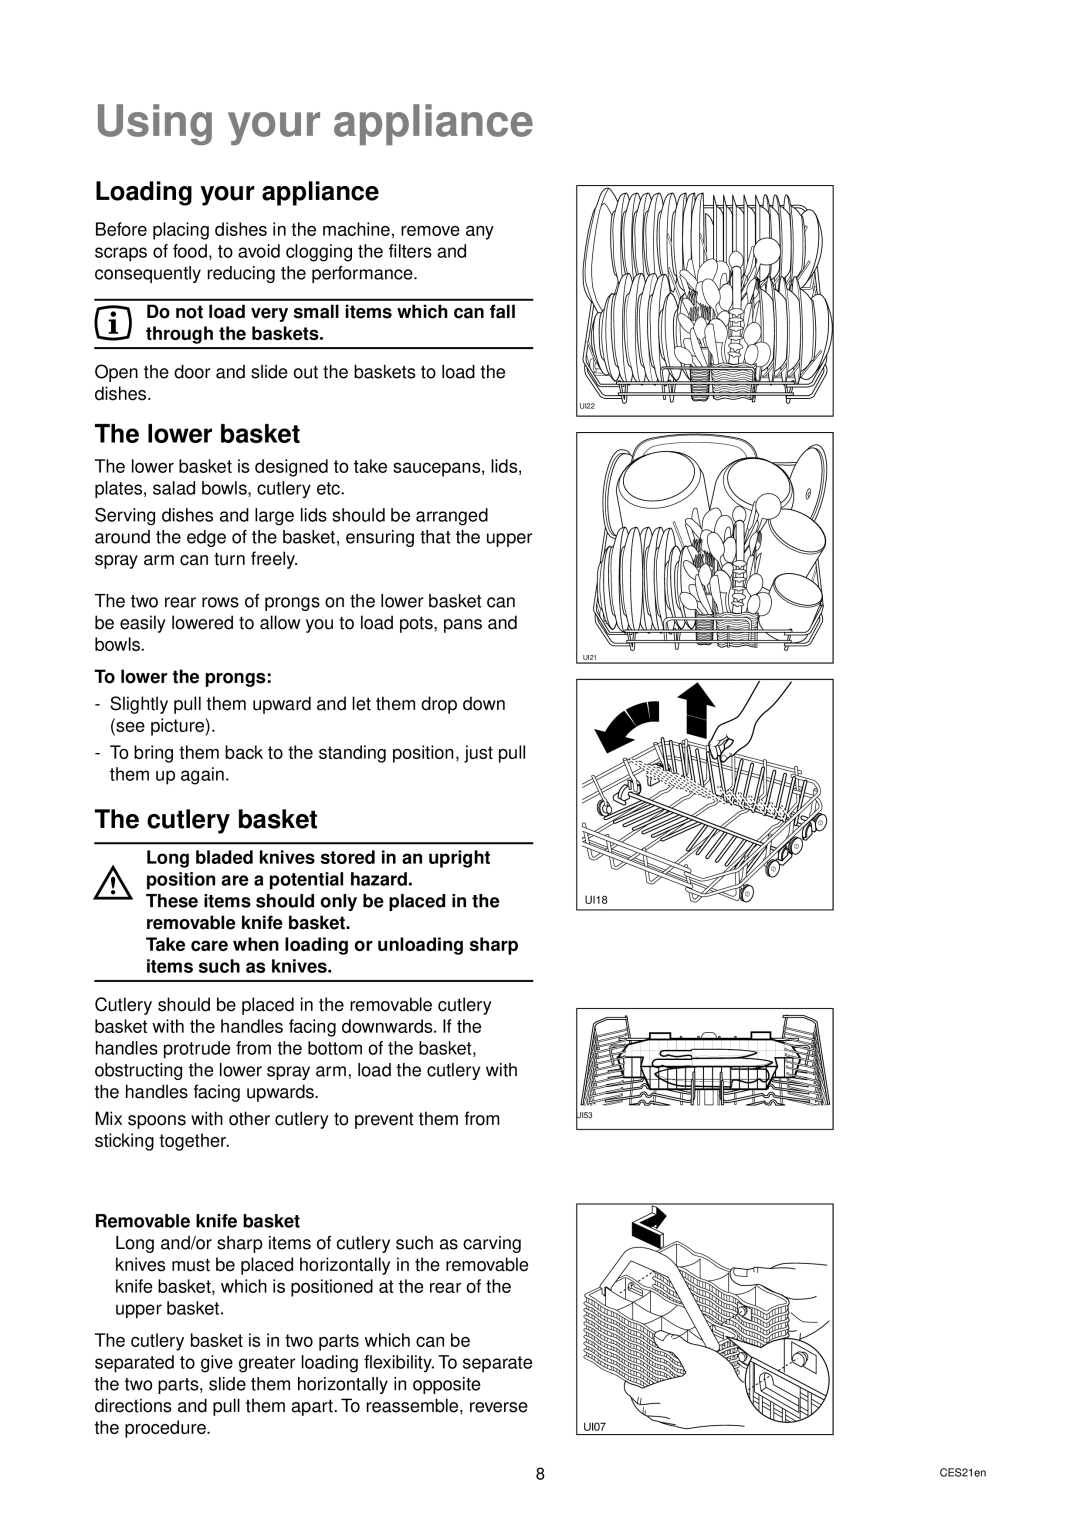 Zanussi DWS 949 manual Using your appliance, Loading your appliance, The lower basket, The cutlery basket 